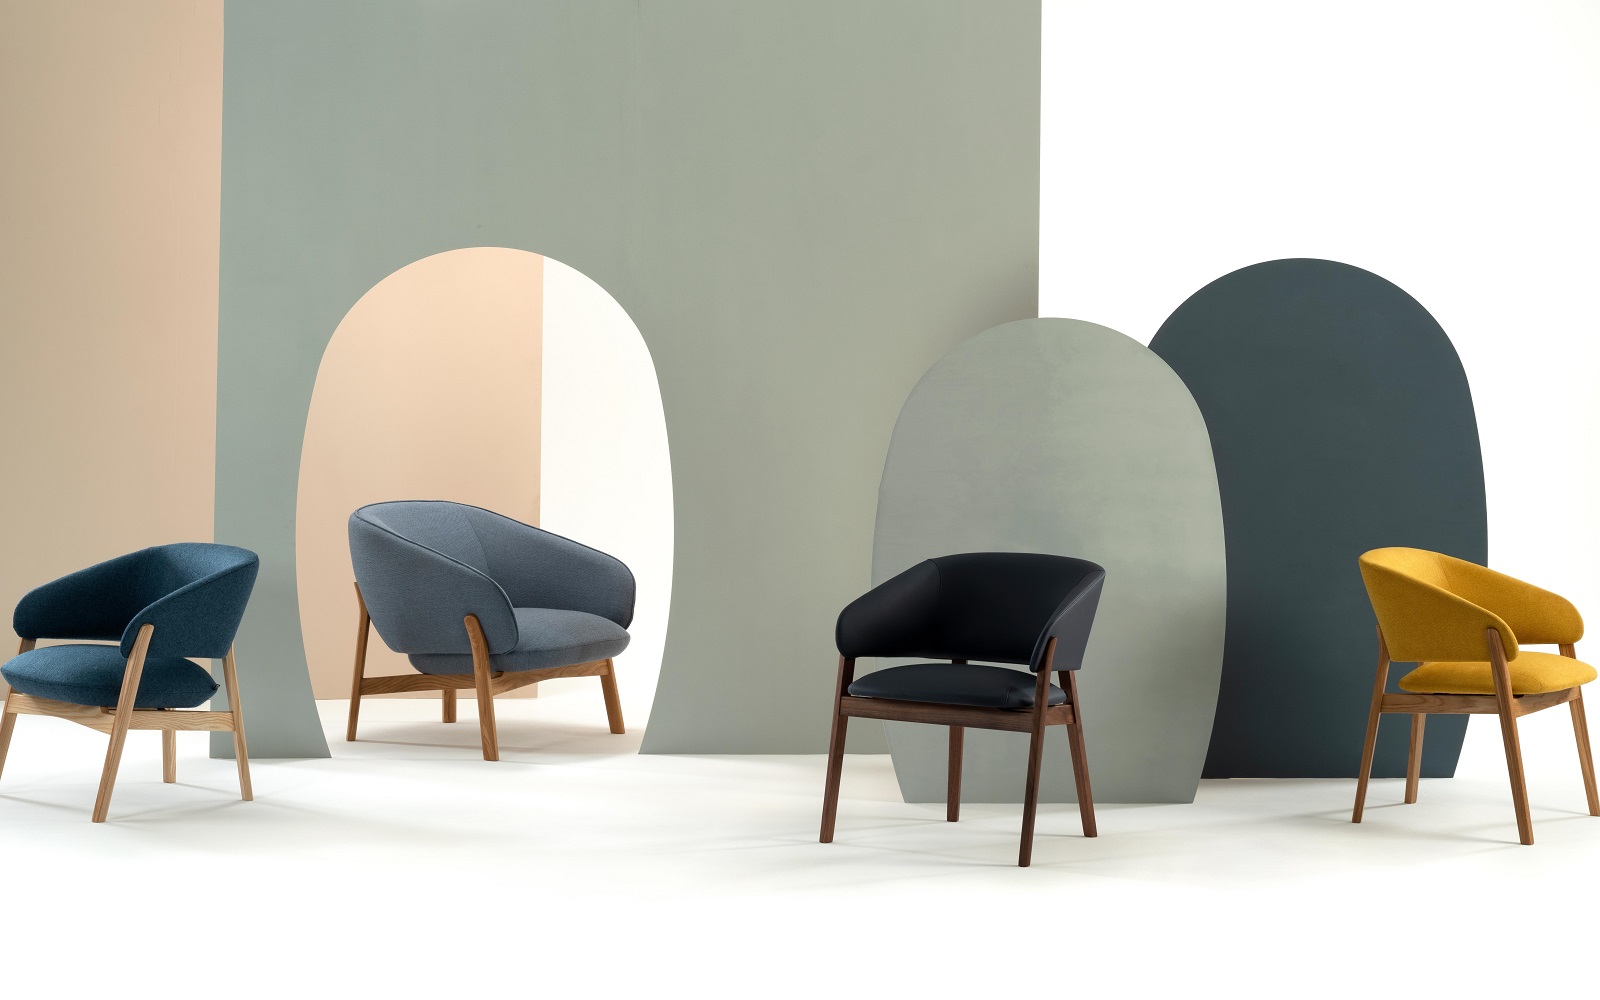 four wooden and upholstered chairs by Morgan against an abstract background in colour blocking